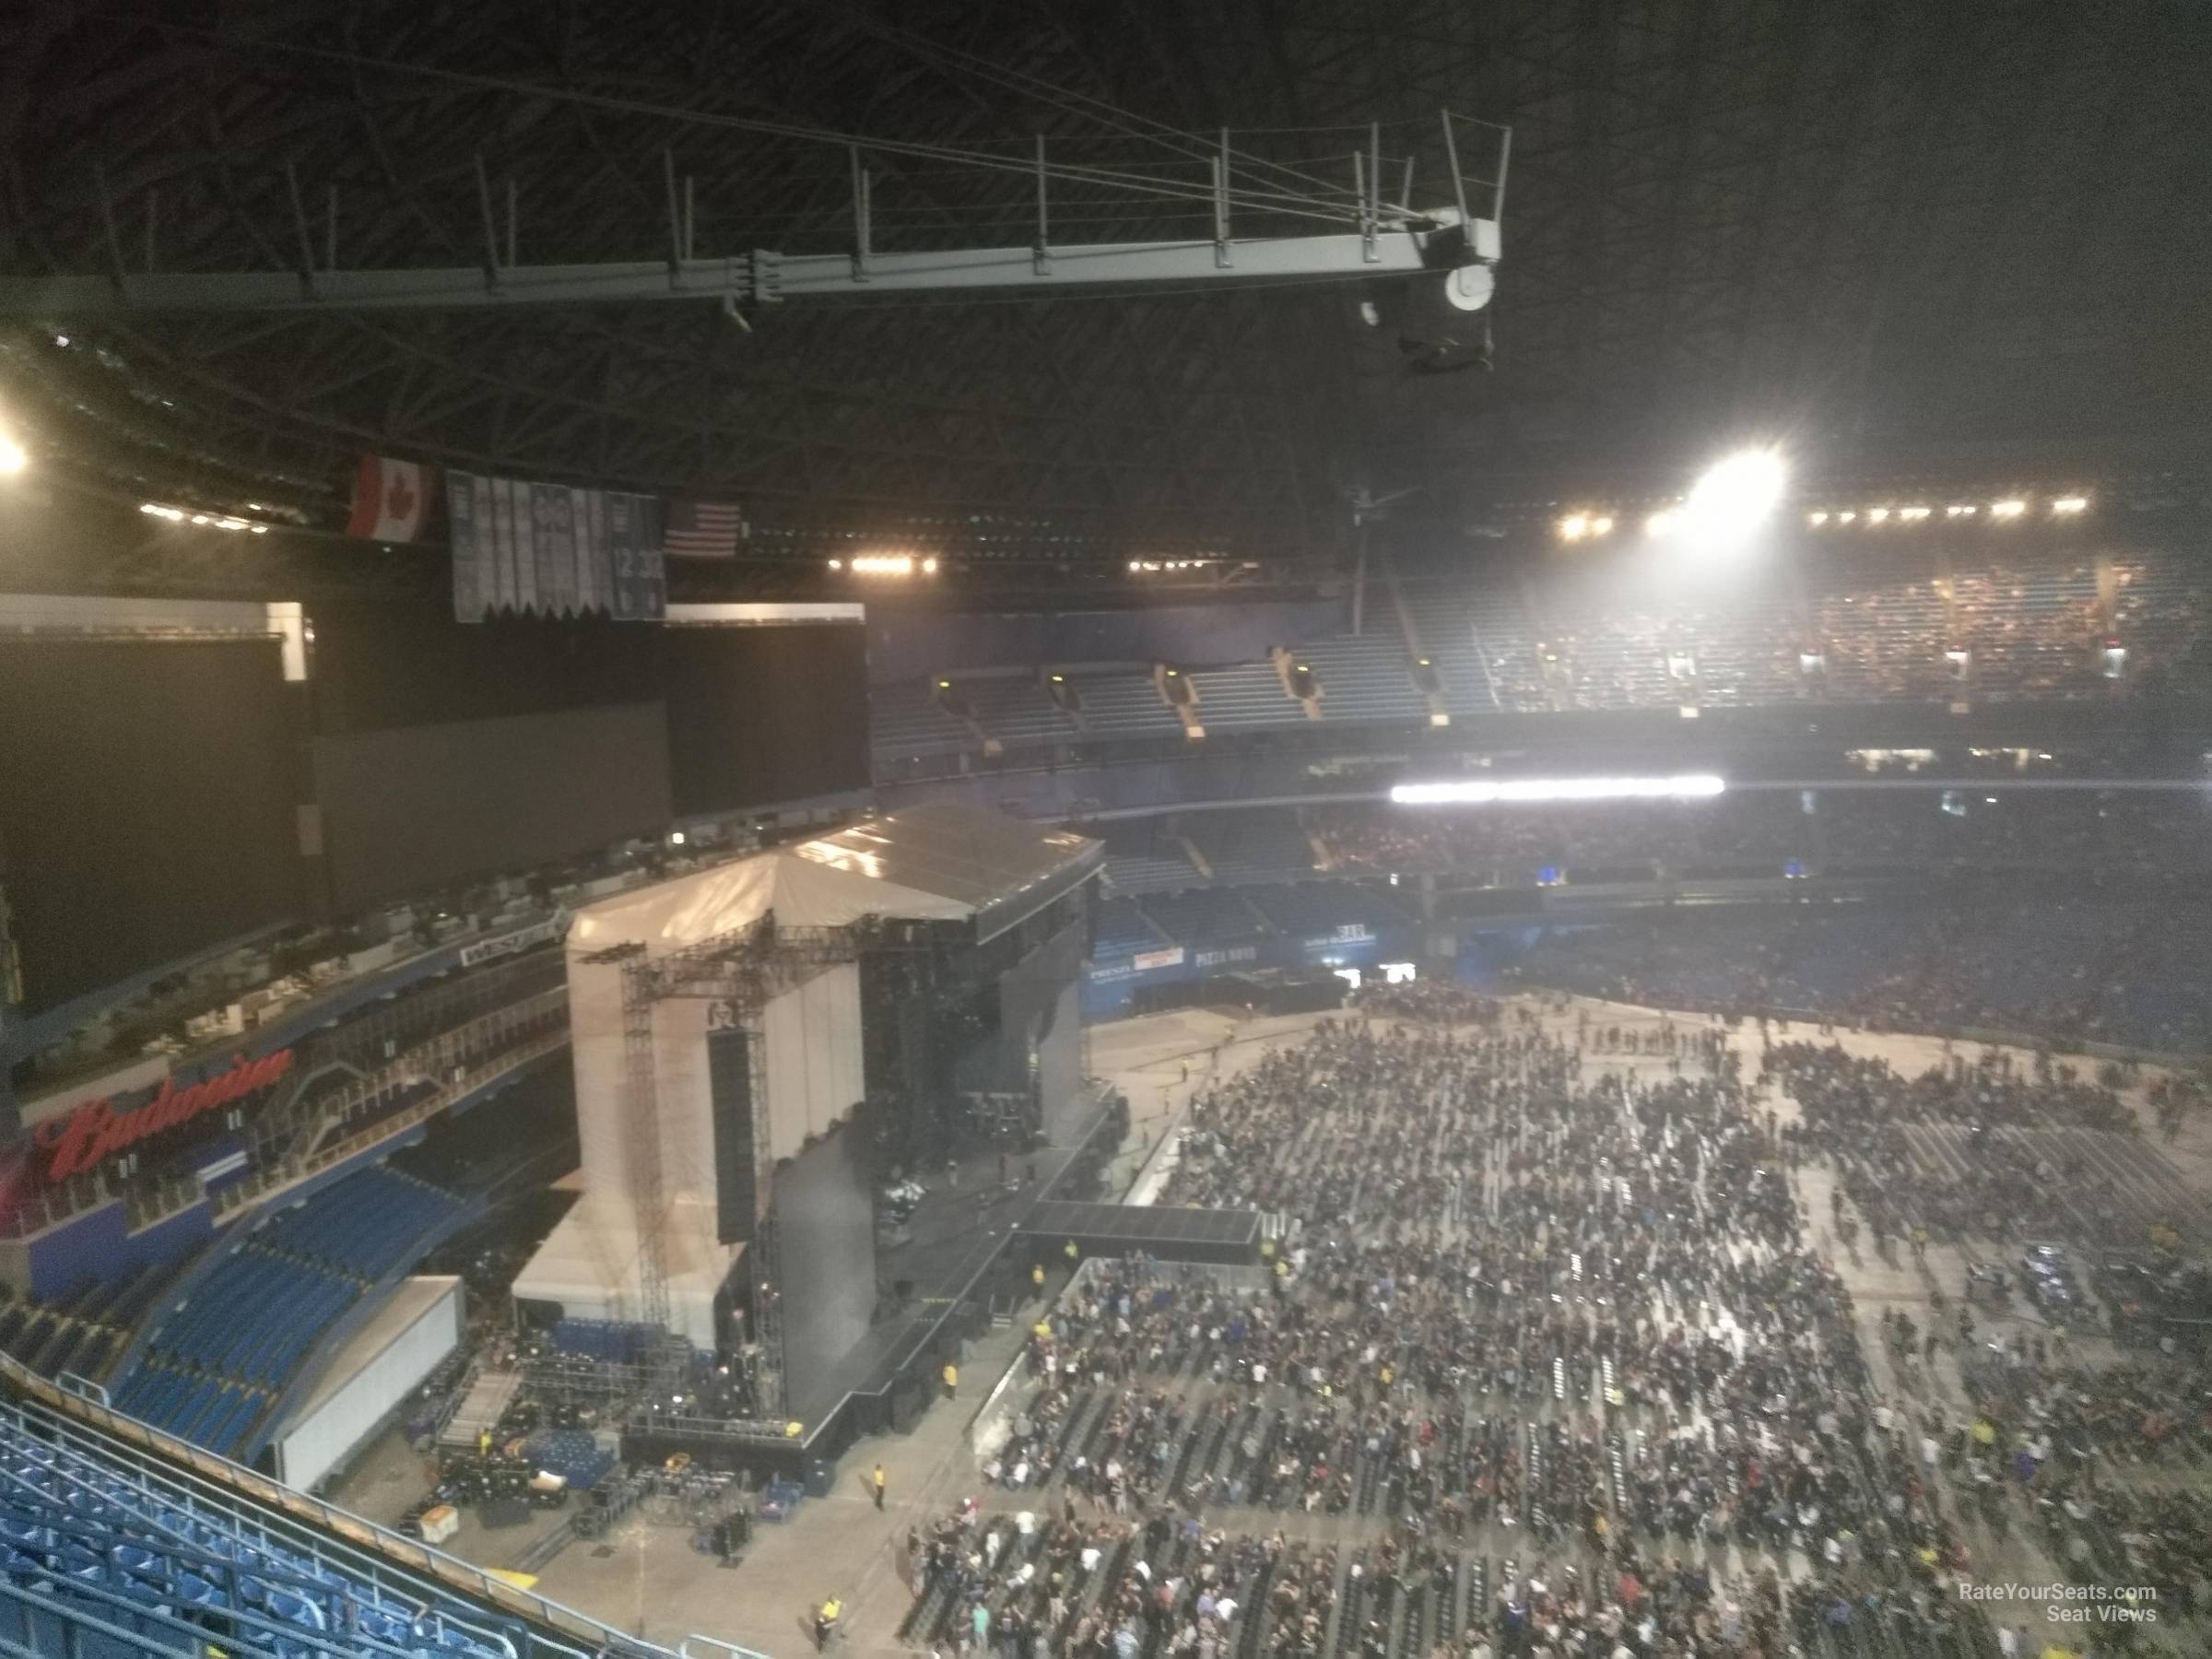 section 539, row 15 seat view  for concert - rogers centre